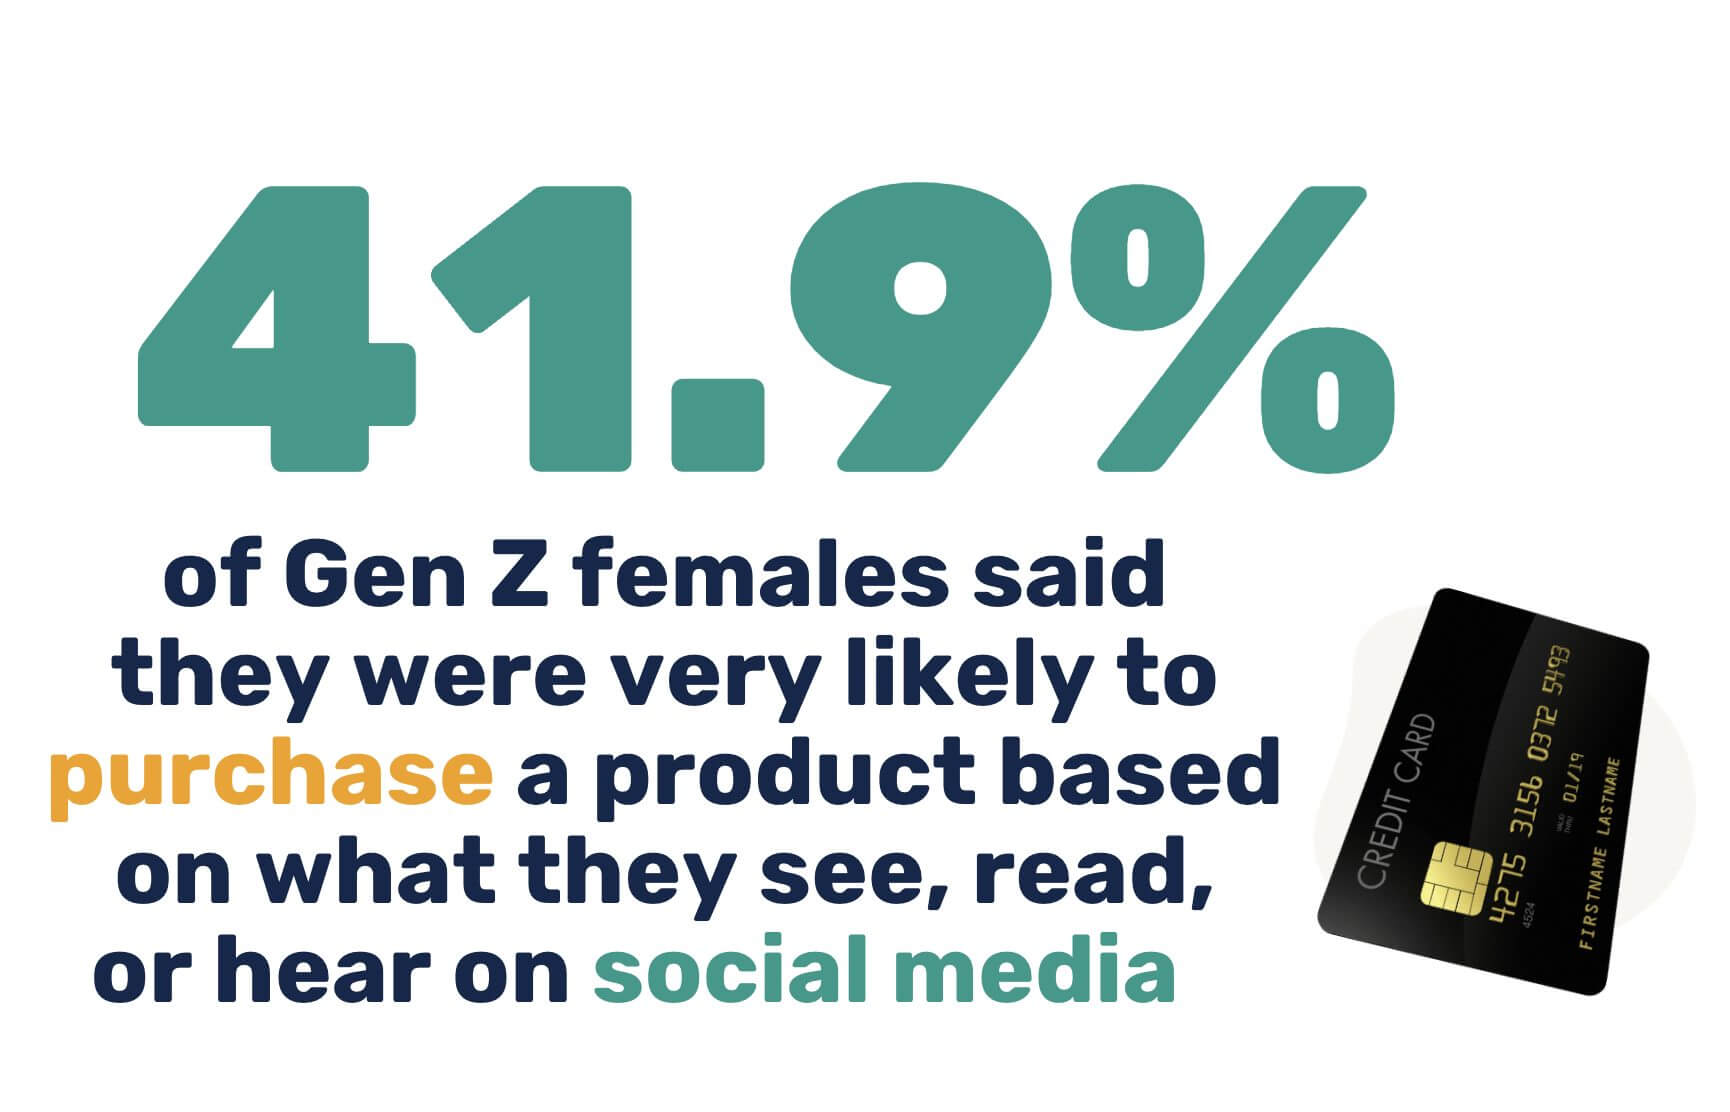 41.9% of Gen Z females said that they were very likely to purchase a product based on what they see read or hear on social media